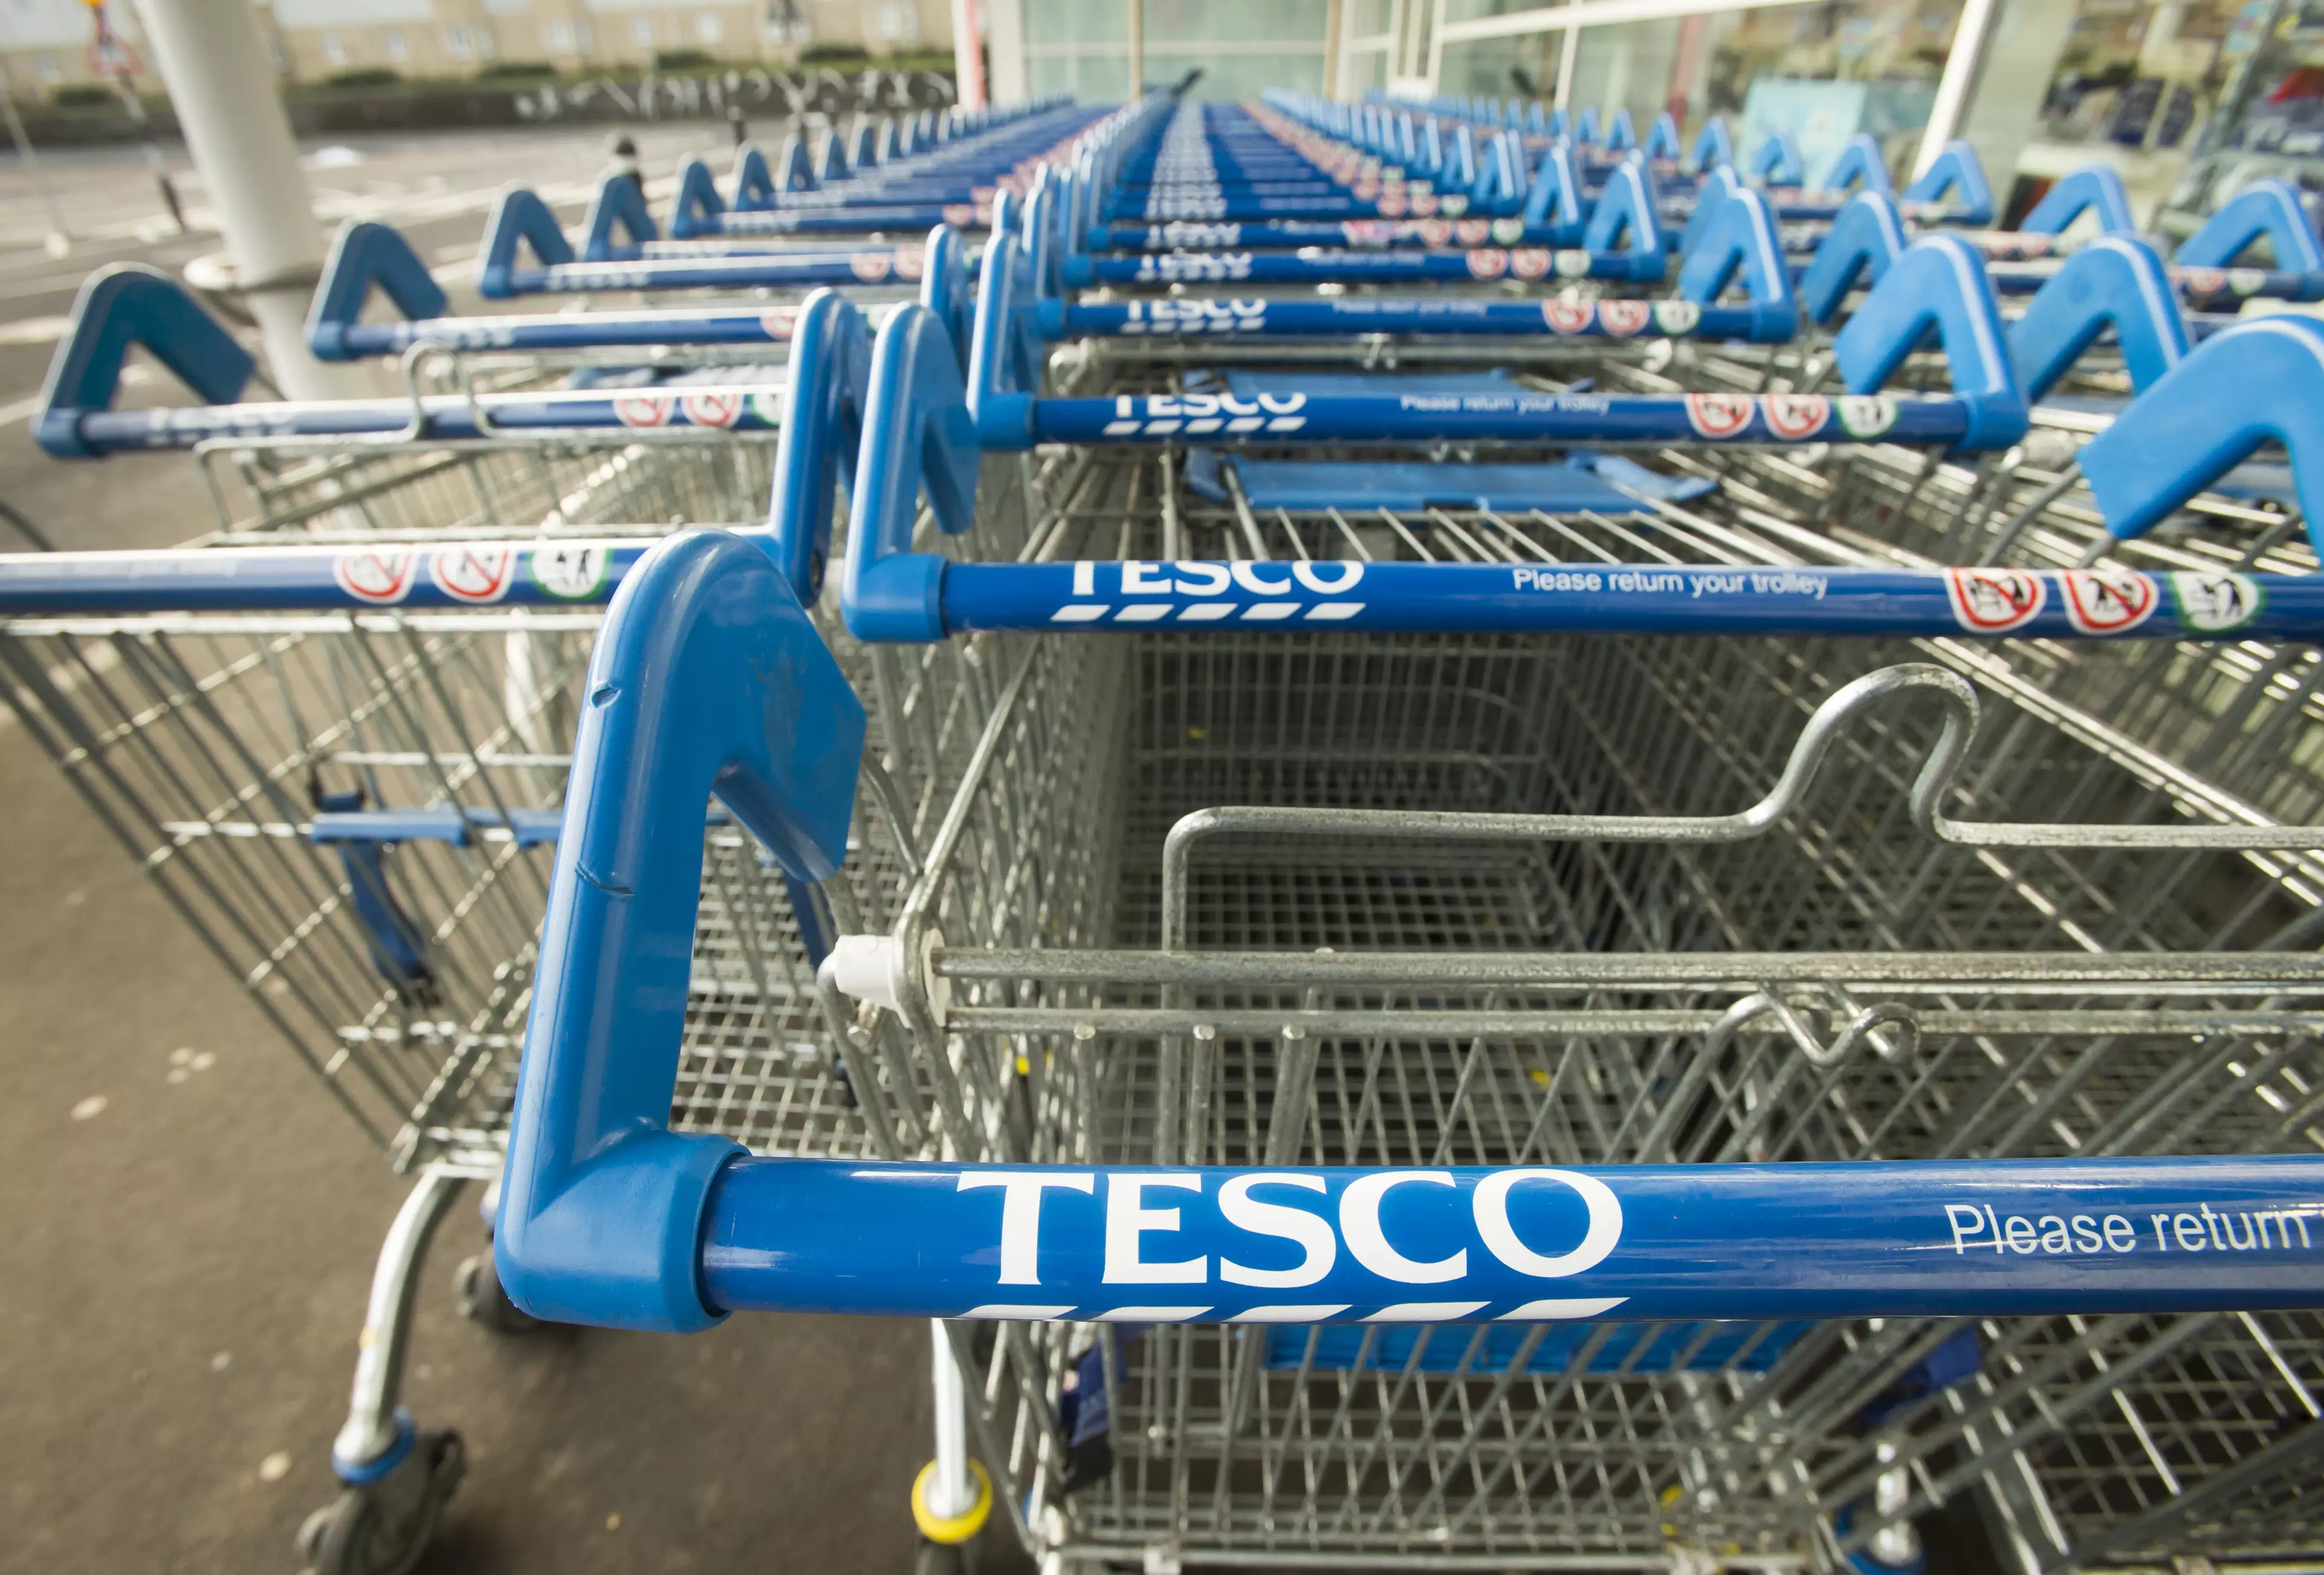 One customer complained to the supermarket giant about their trolleys.